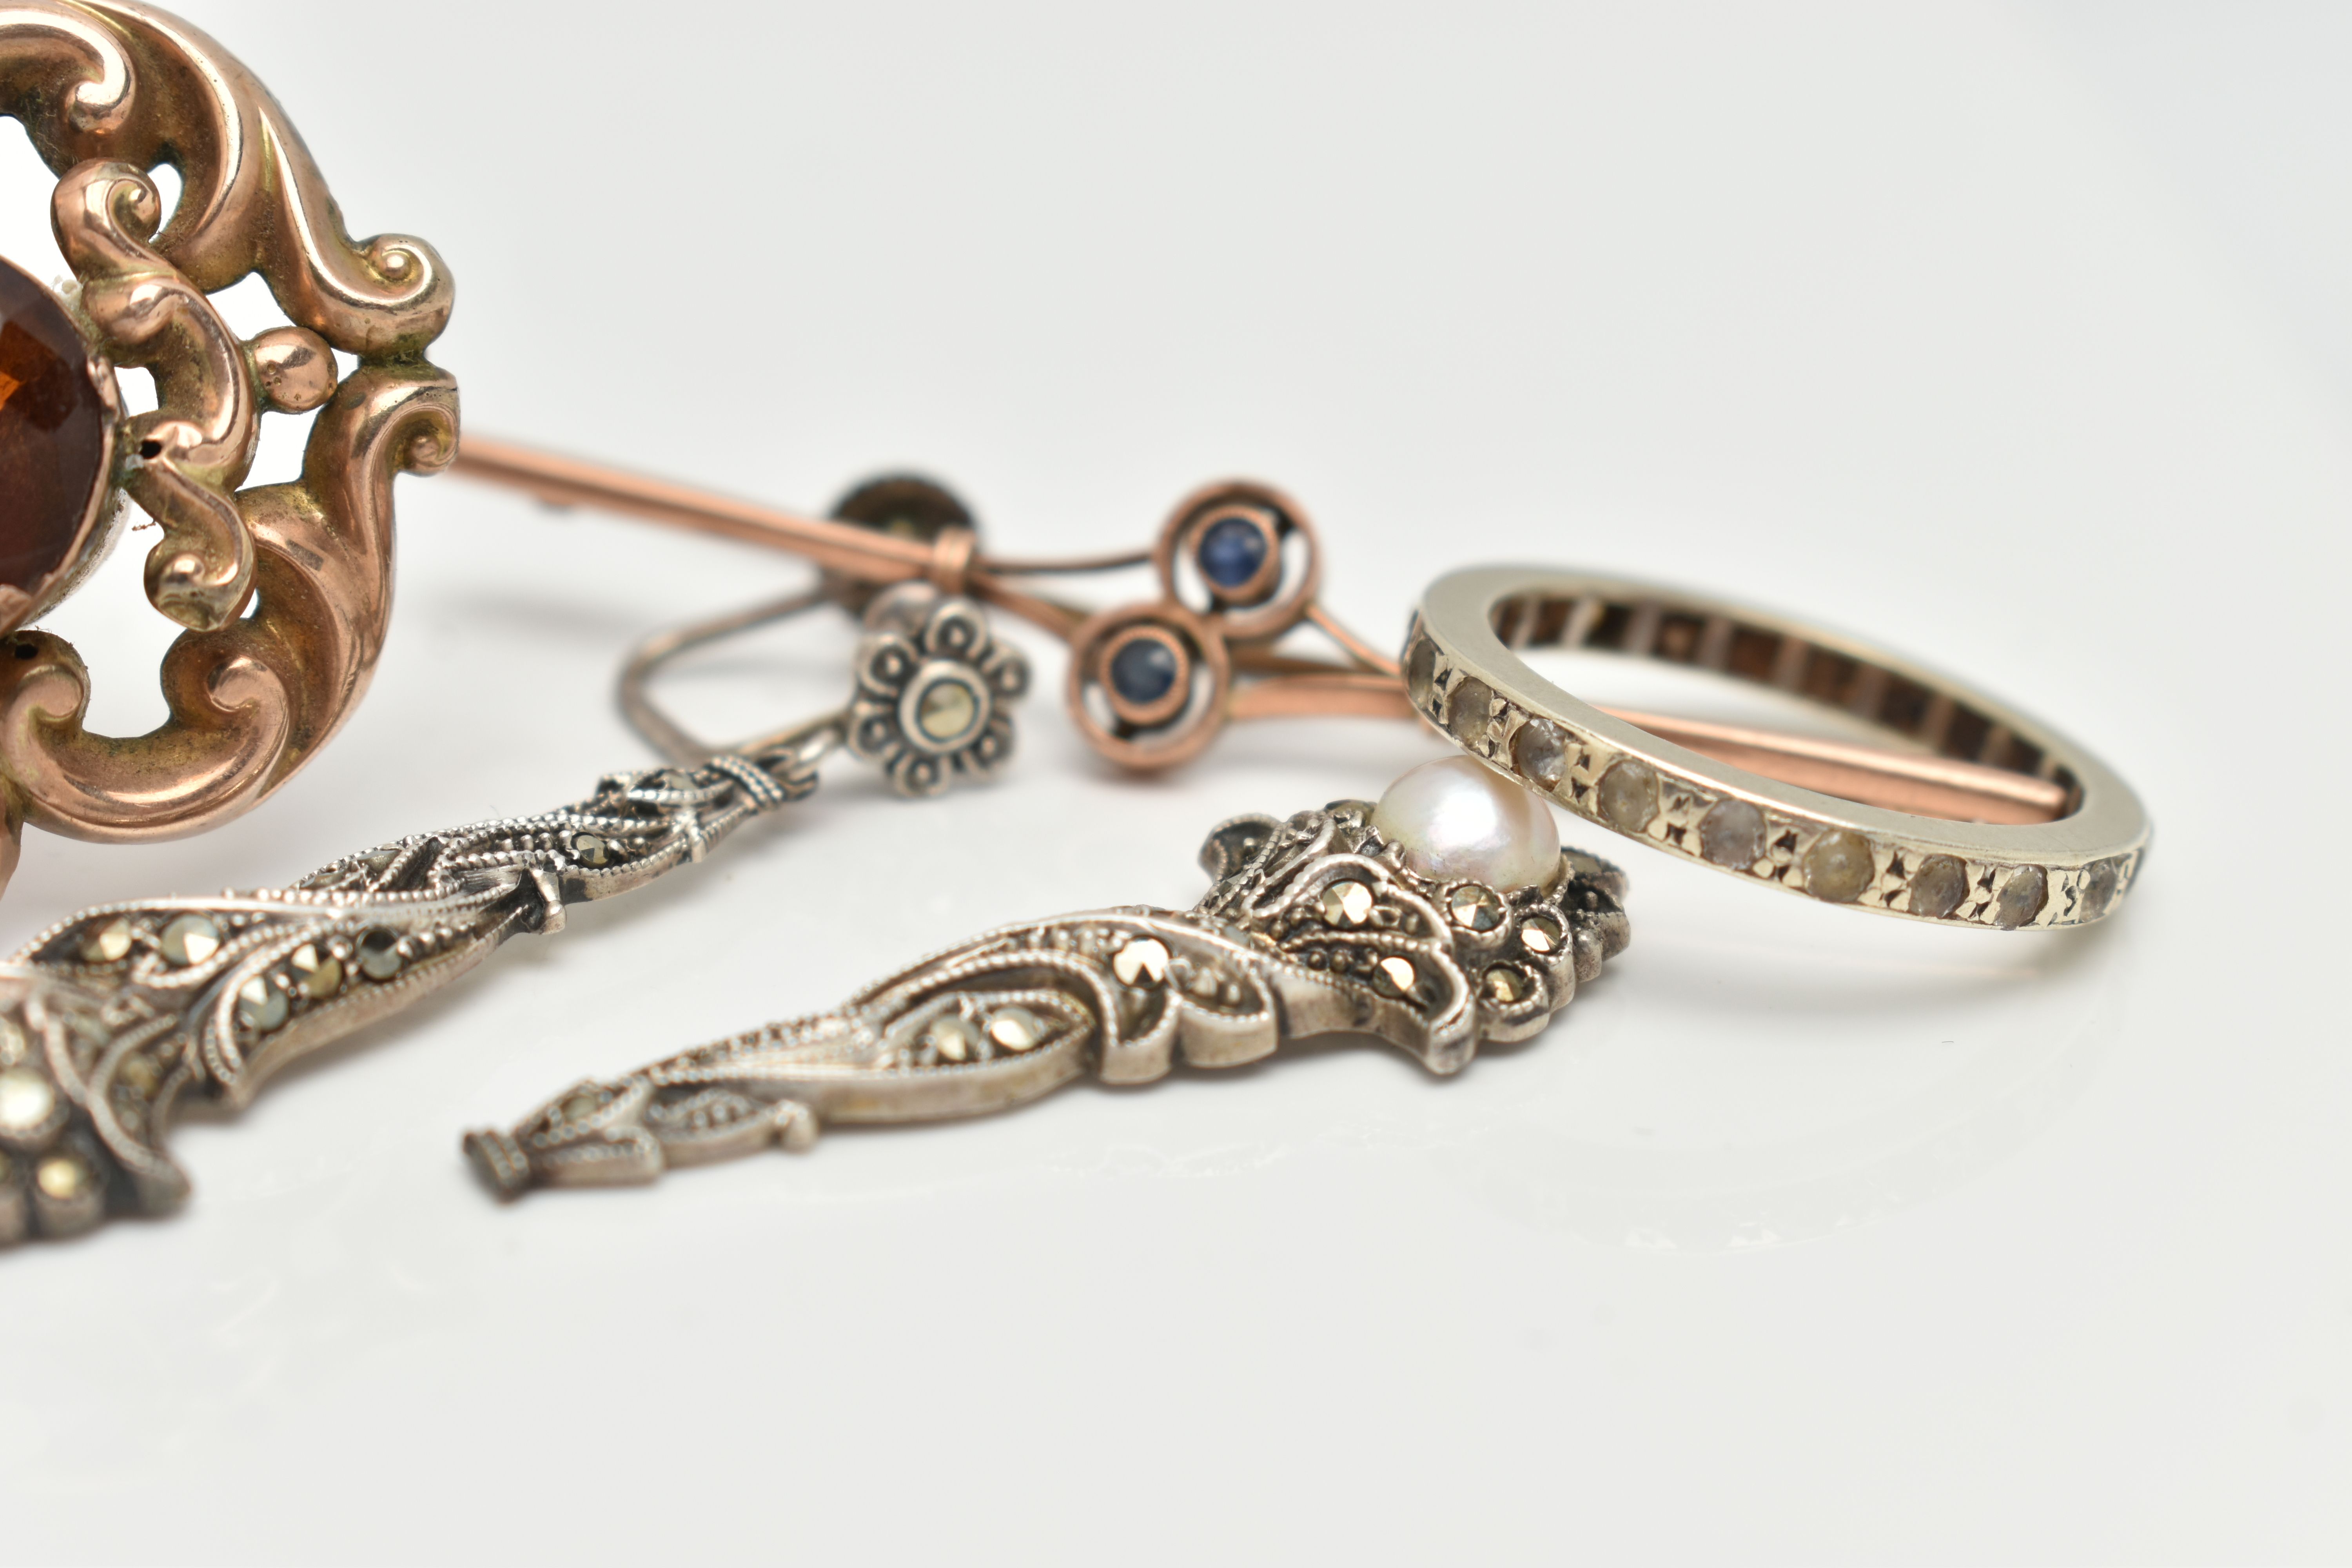 FOUR ITEMS OF JEWELLERY, to include an early 20th century bar brooch with central bifurcated - Image 3 of 4